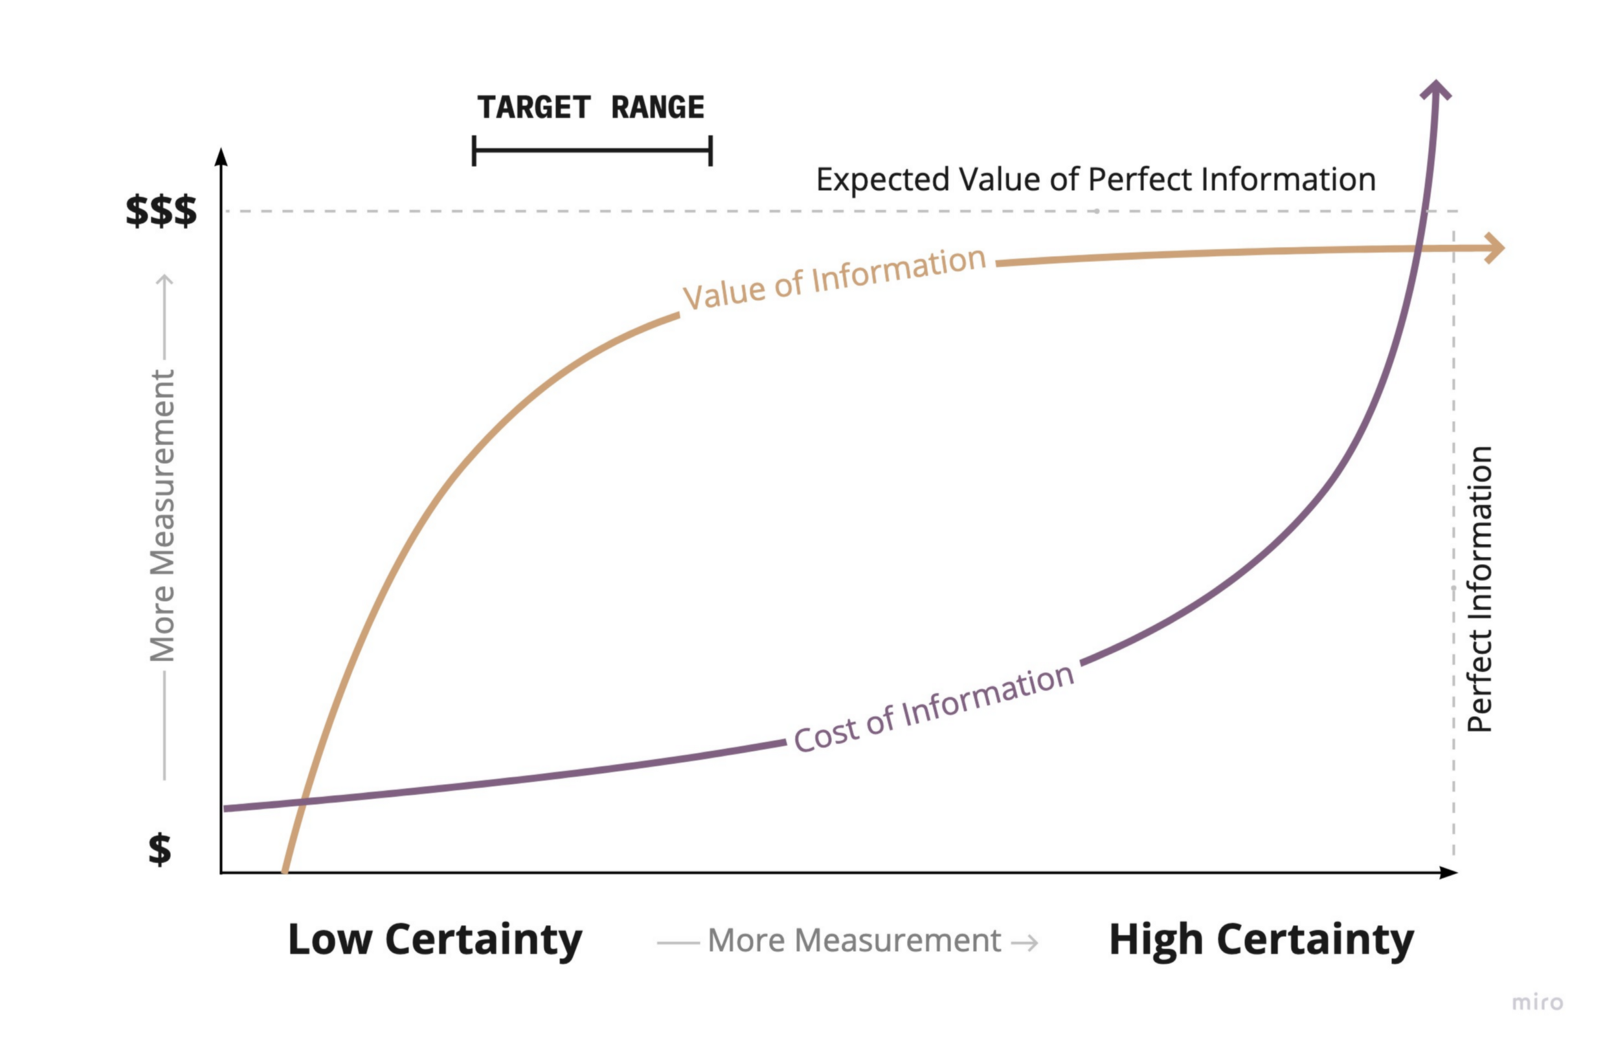 As you reduce uncertainty with further measurement, you have to spend more and more to gain additional certainty.